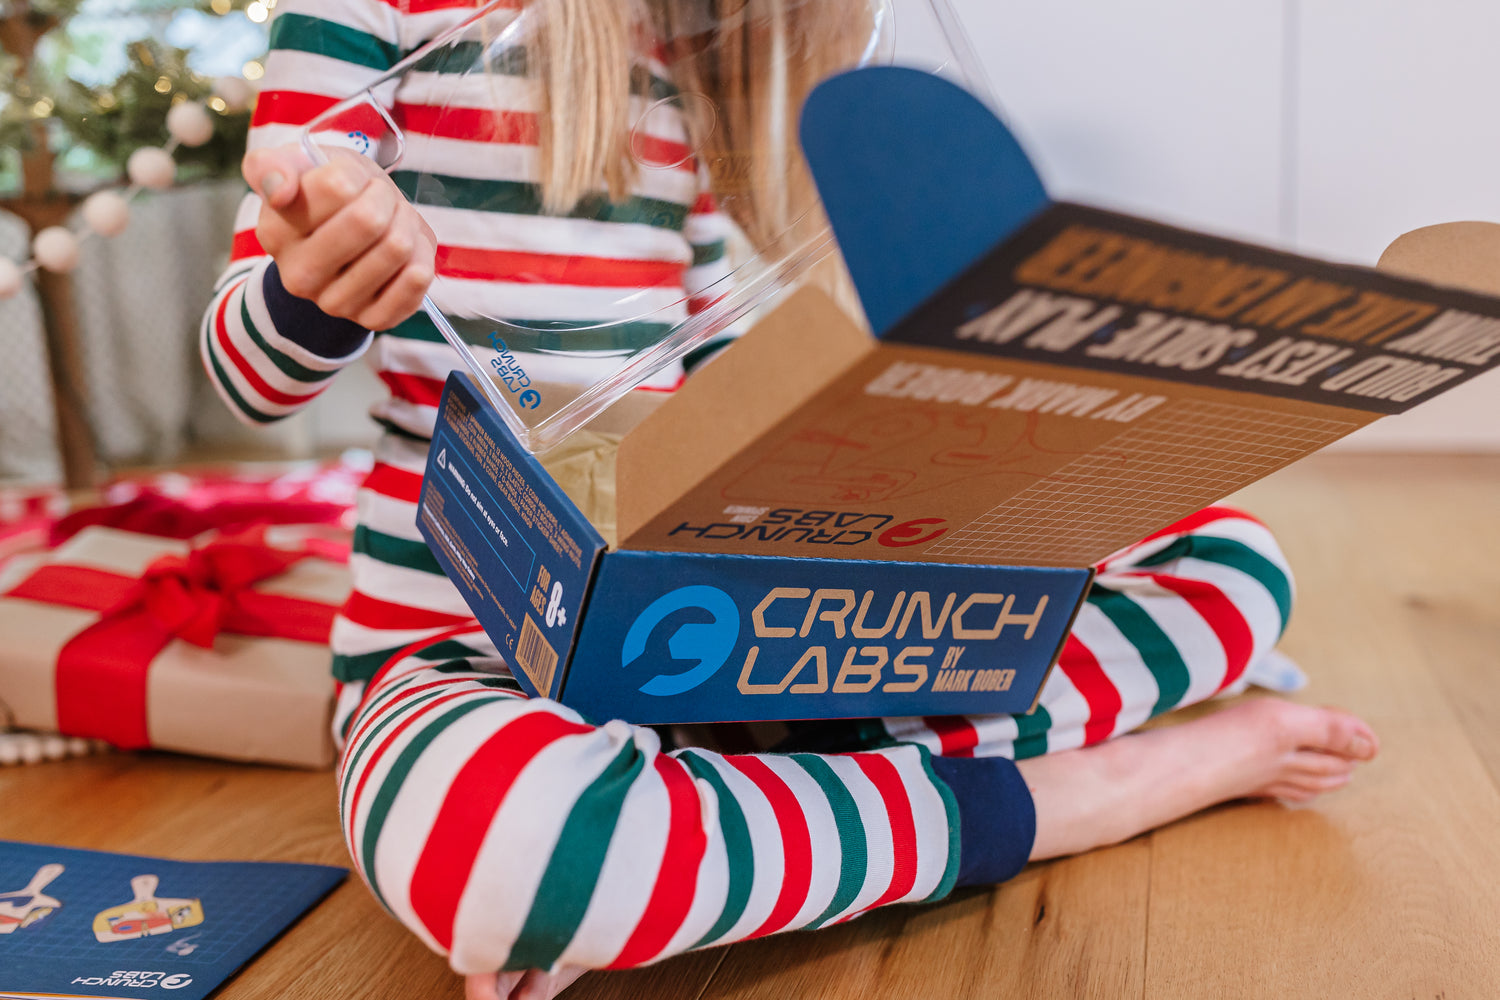 Gift a CrunchLabs Build Box Subscription!